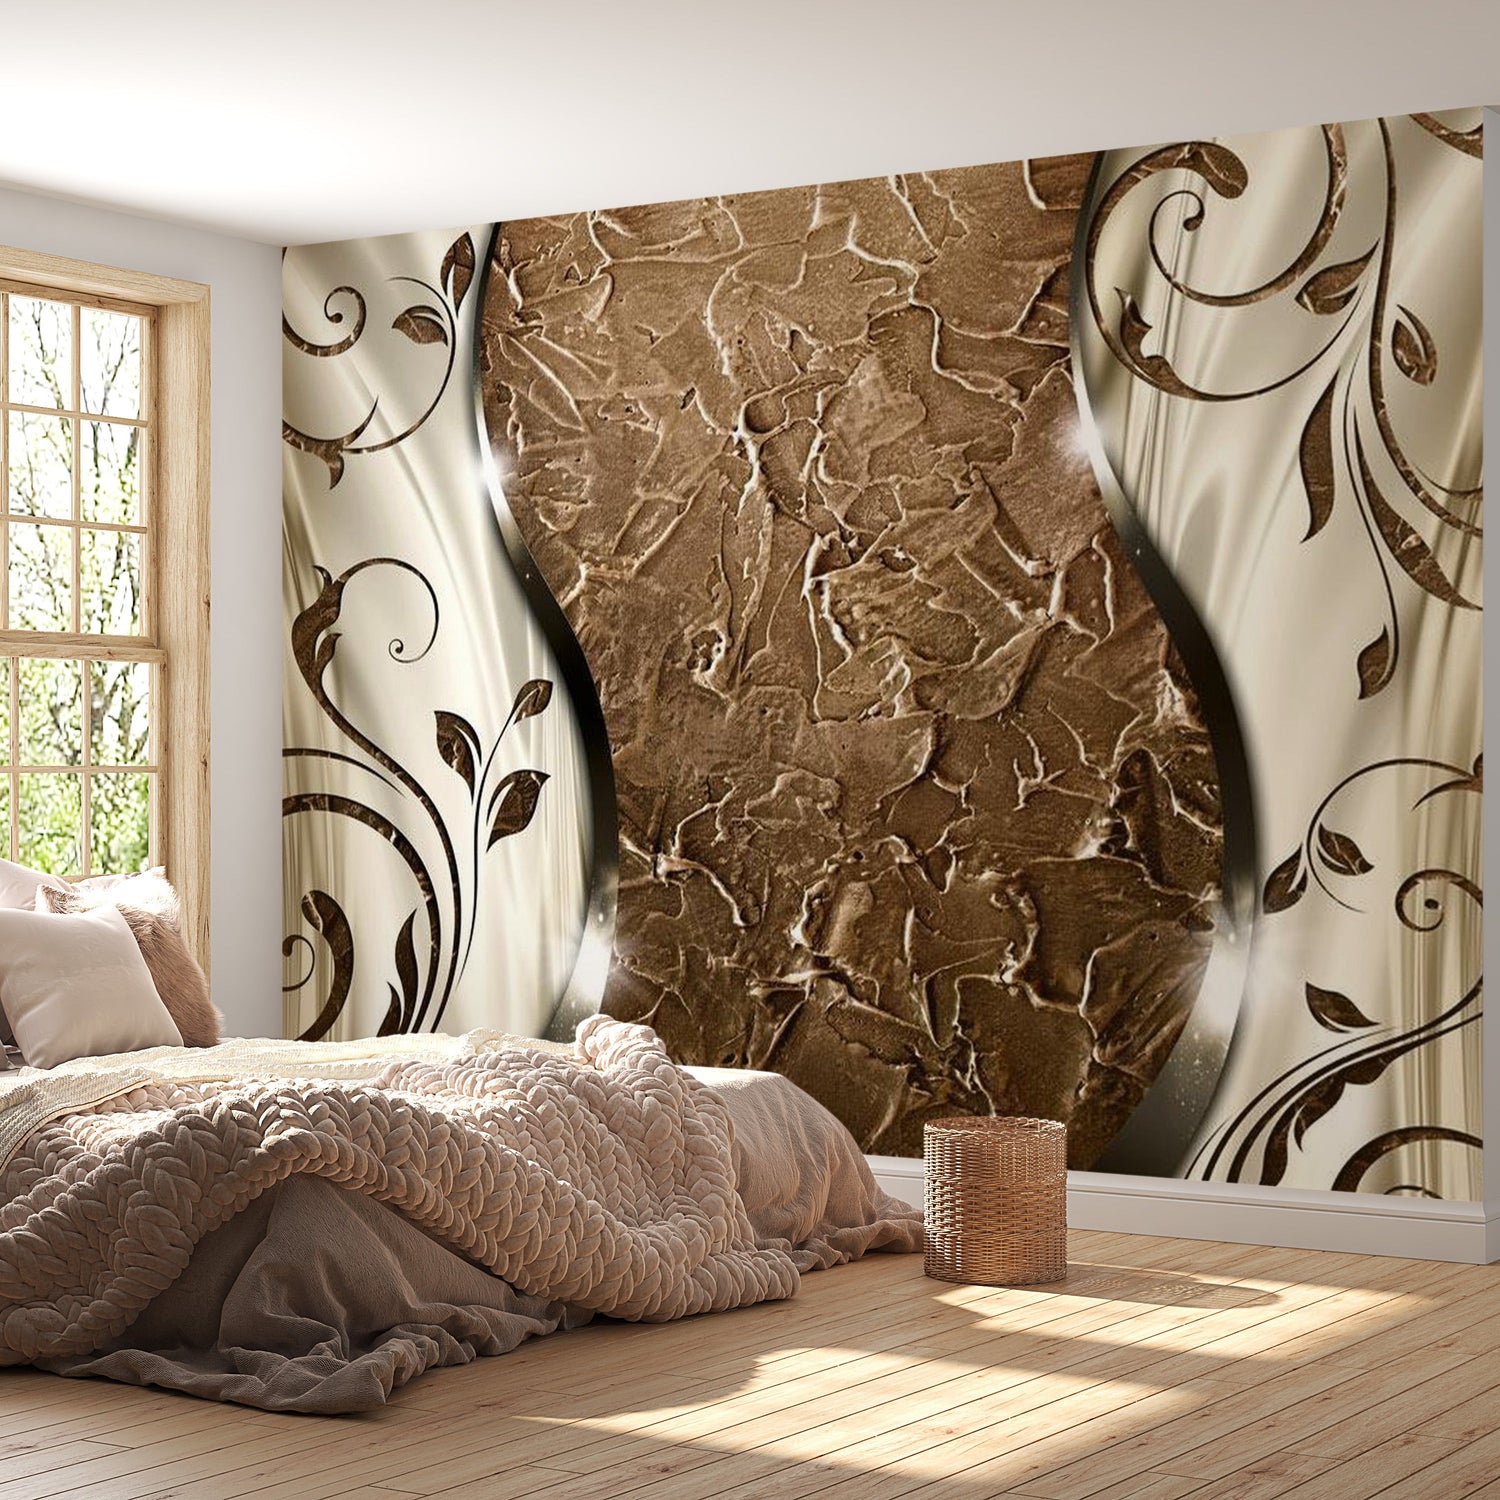 Peel & Stick Glam Wall Mural - Brown Twigs - Removable Wall Decals